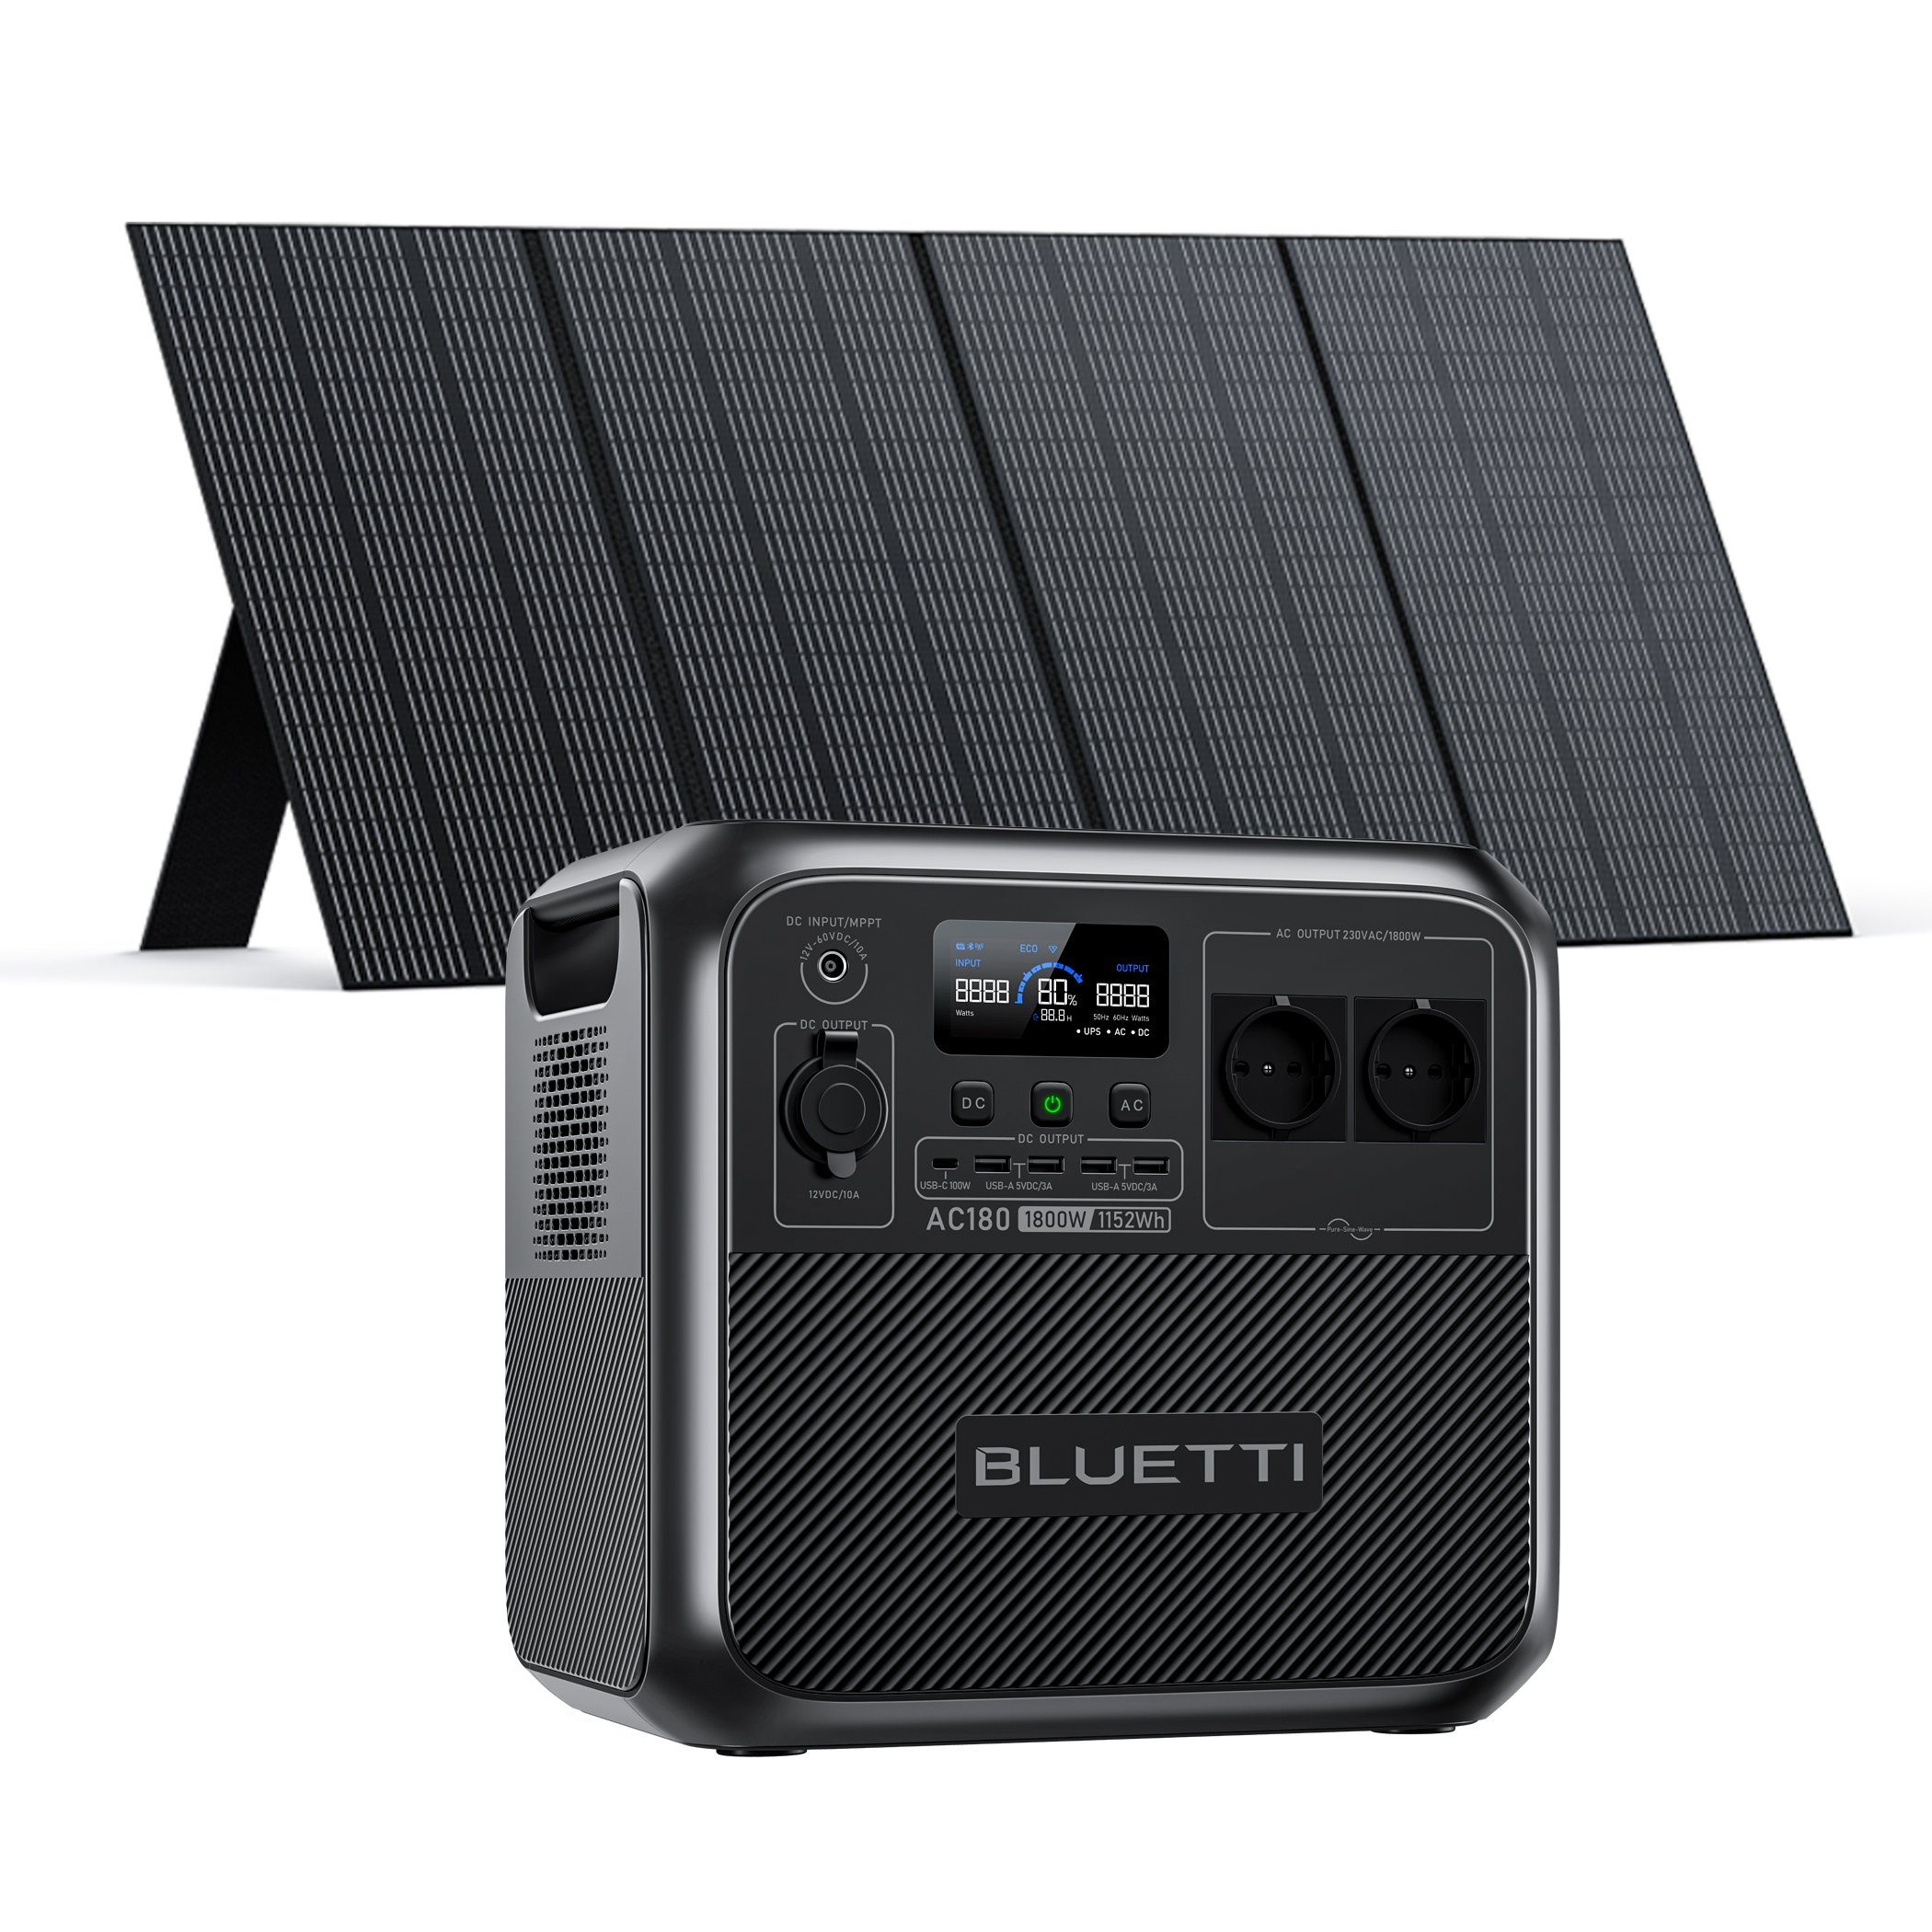 BLUETTI Генератори AC180 1800W/1152Wh Tragbarer Power Generator mit Solarpanel, (packung, Mobile Stromgenerator mit LiFePO4 Batterie), 2.700 W Powerlifting-Modus